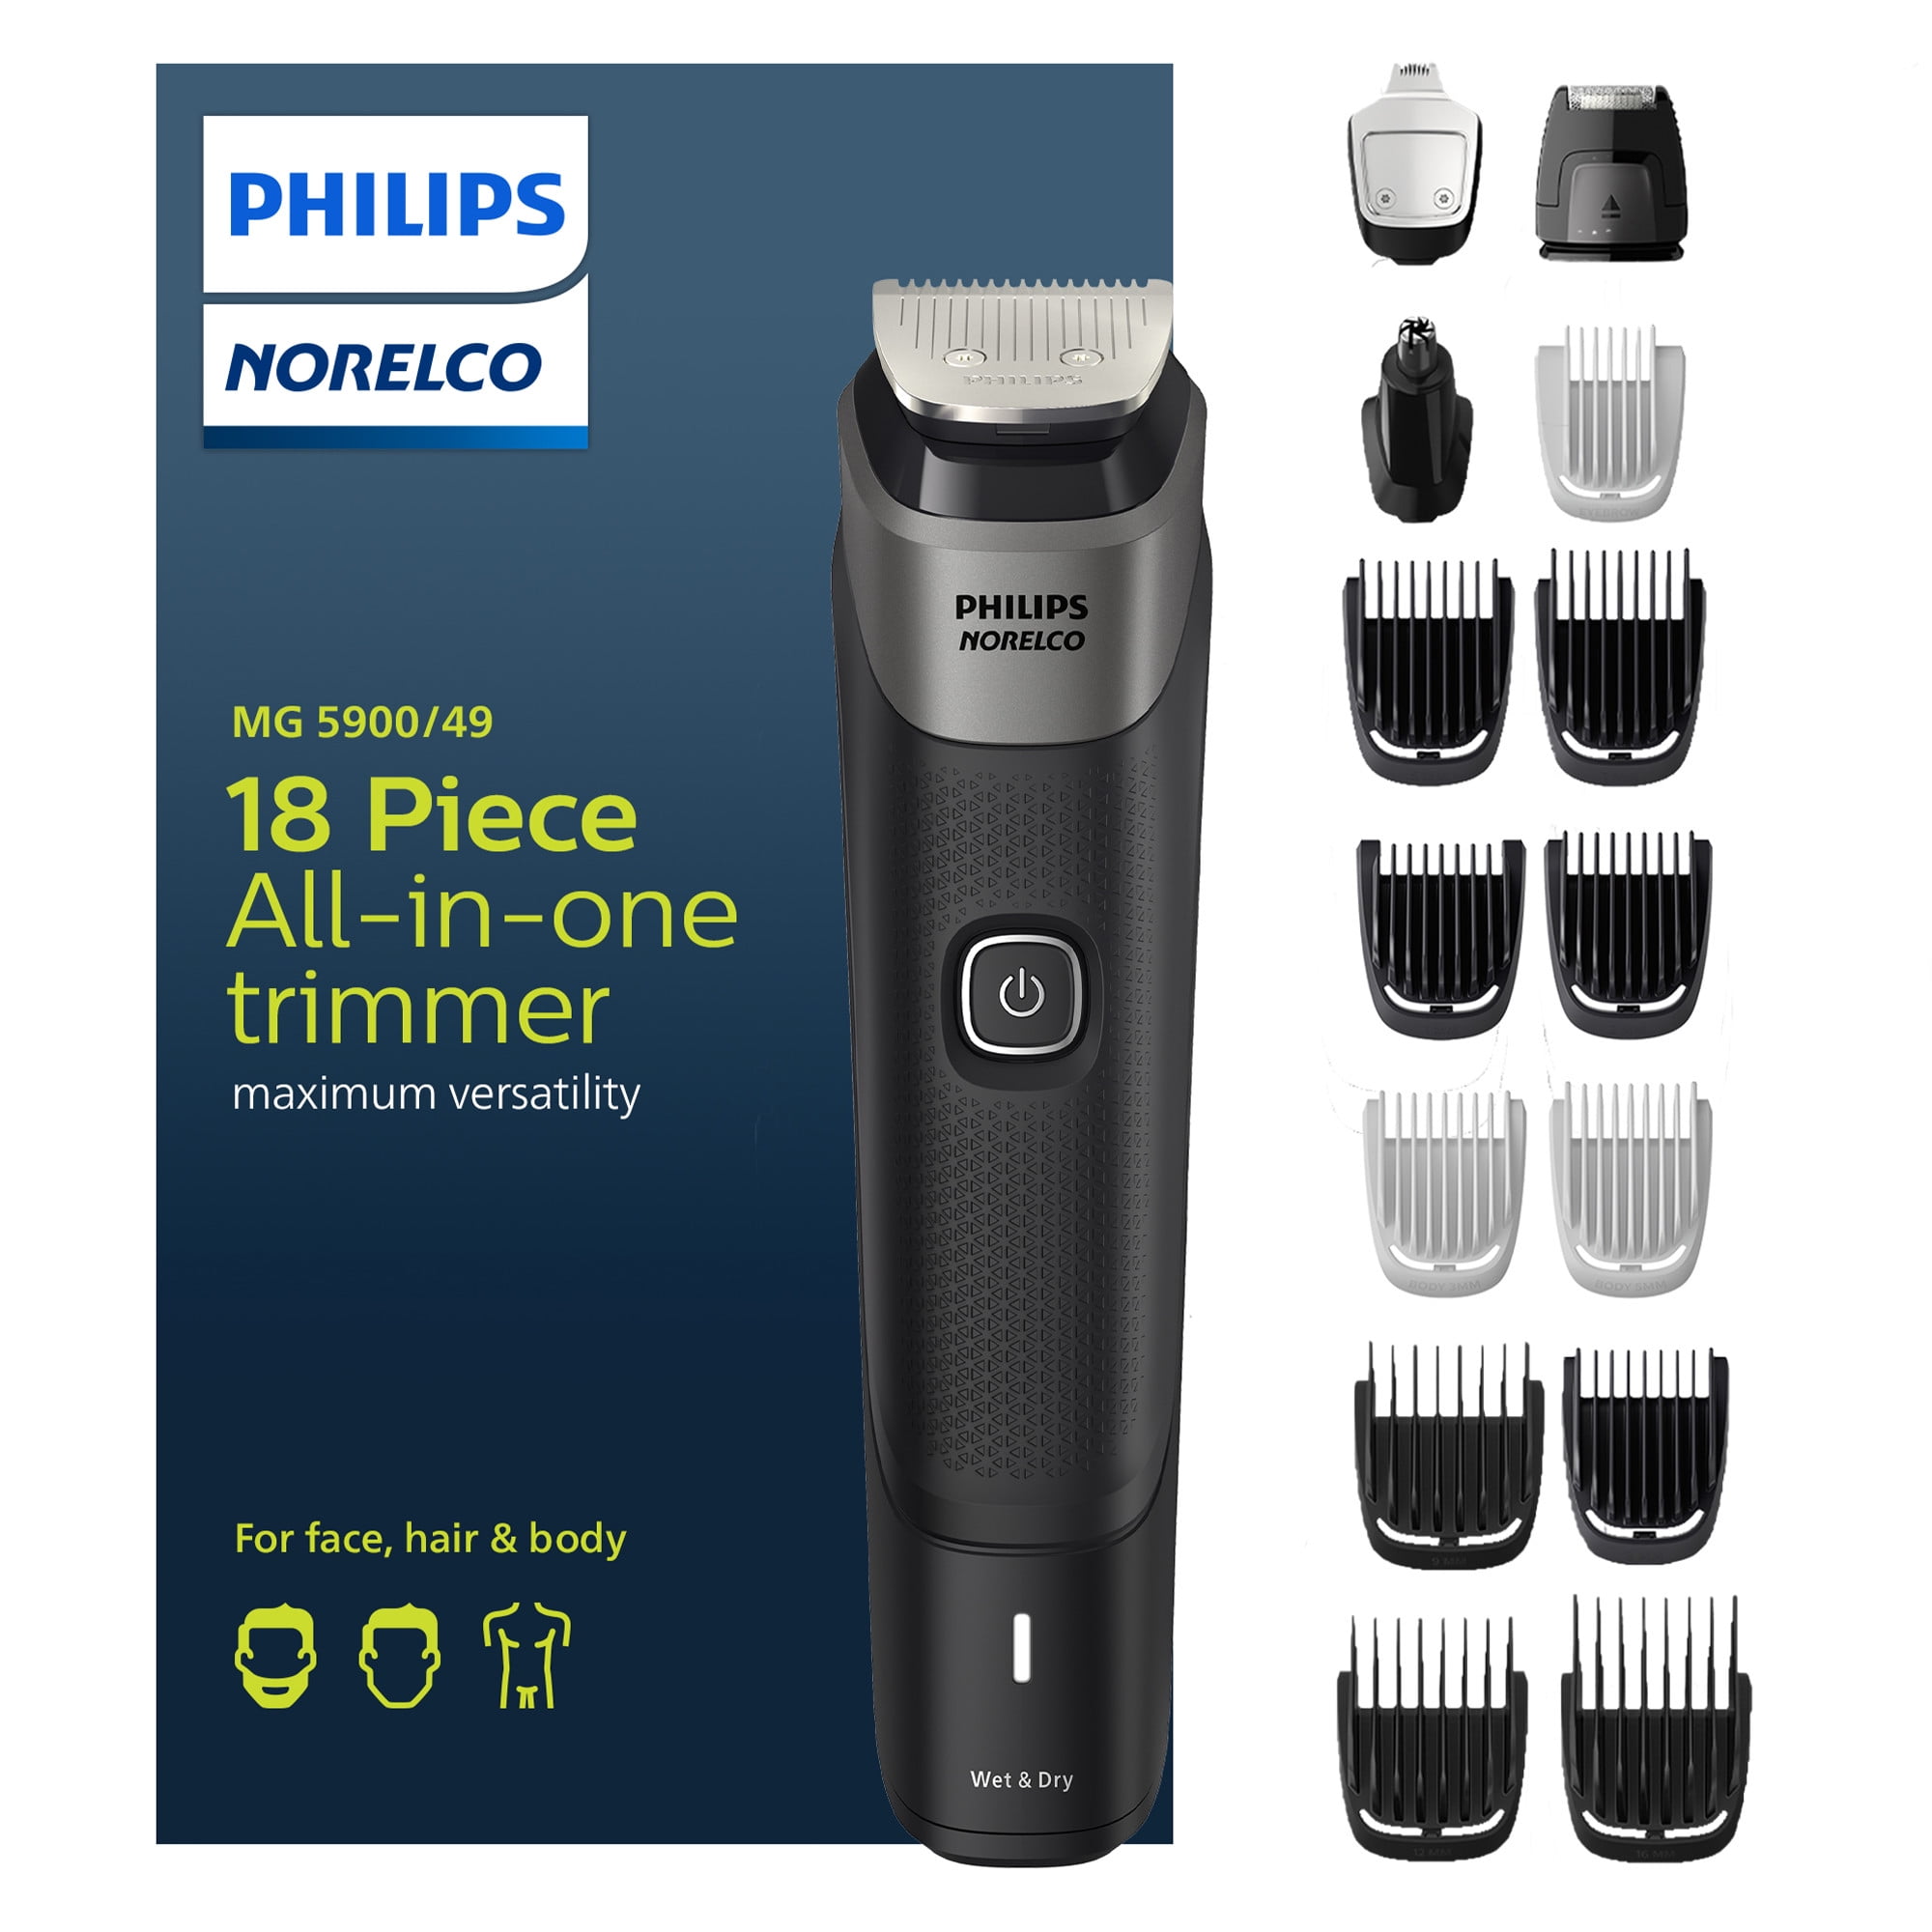 Philips Norelco Multigroom 18 Piece, Beard Face, Hair, Body and Intimate Hair Trimmer For Men - No Oil MG5900/49 Walmart.com